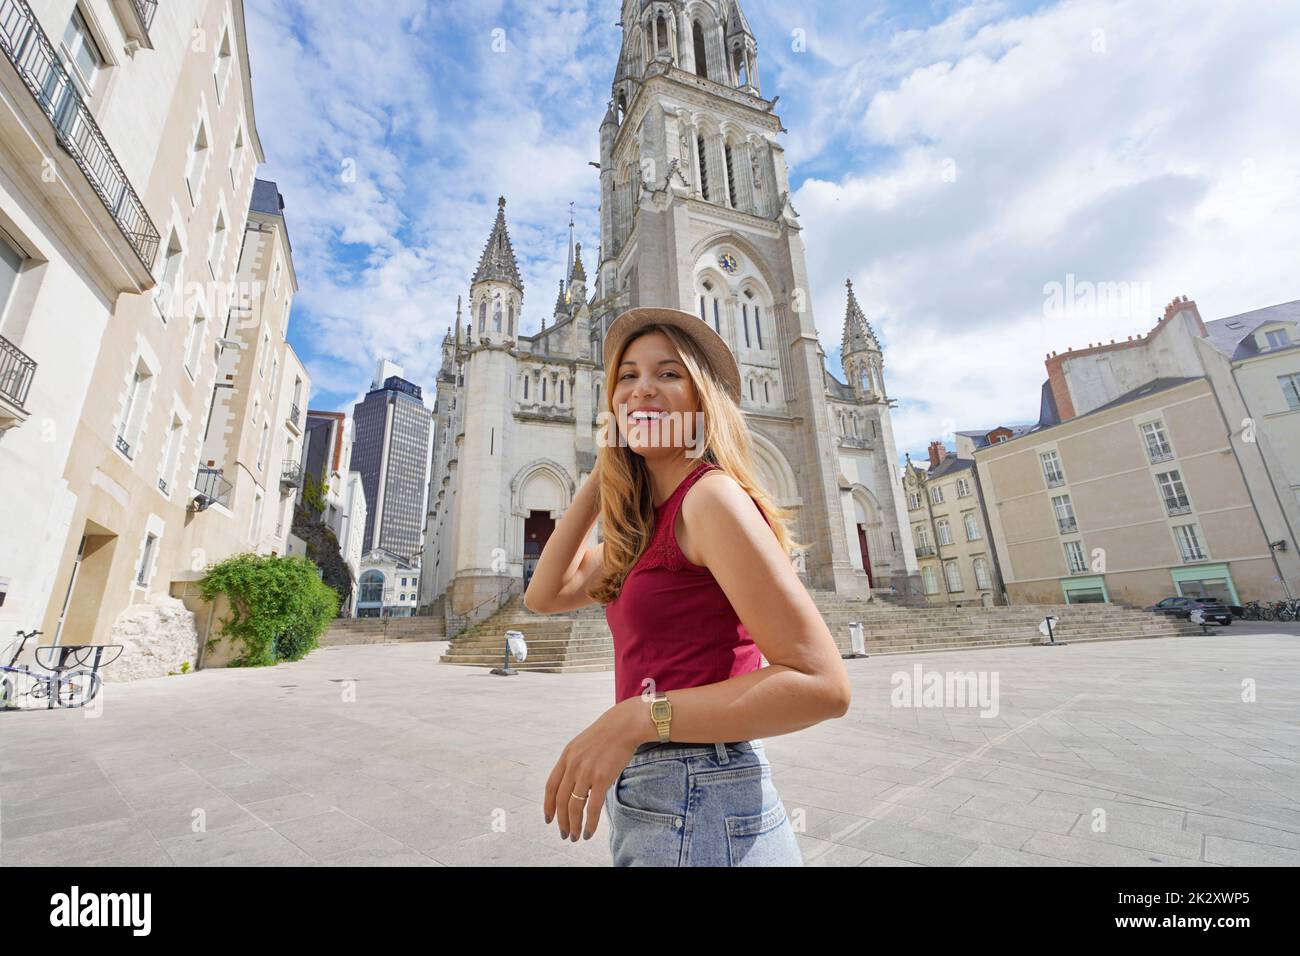 Smiling tourist girl visiting the city of Nantes, France. Looks at camera. Wide angle. Stock Photo